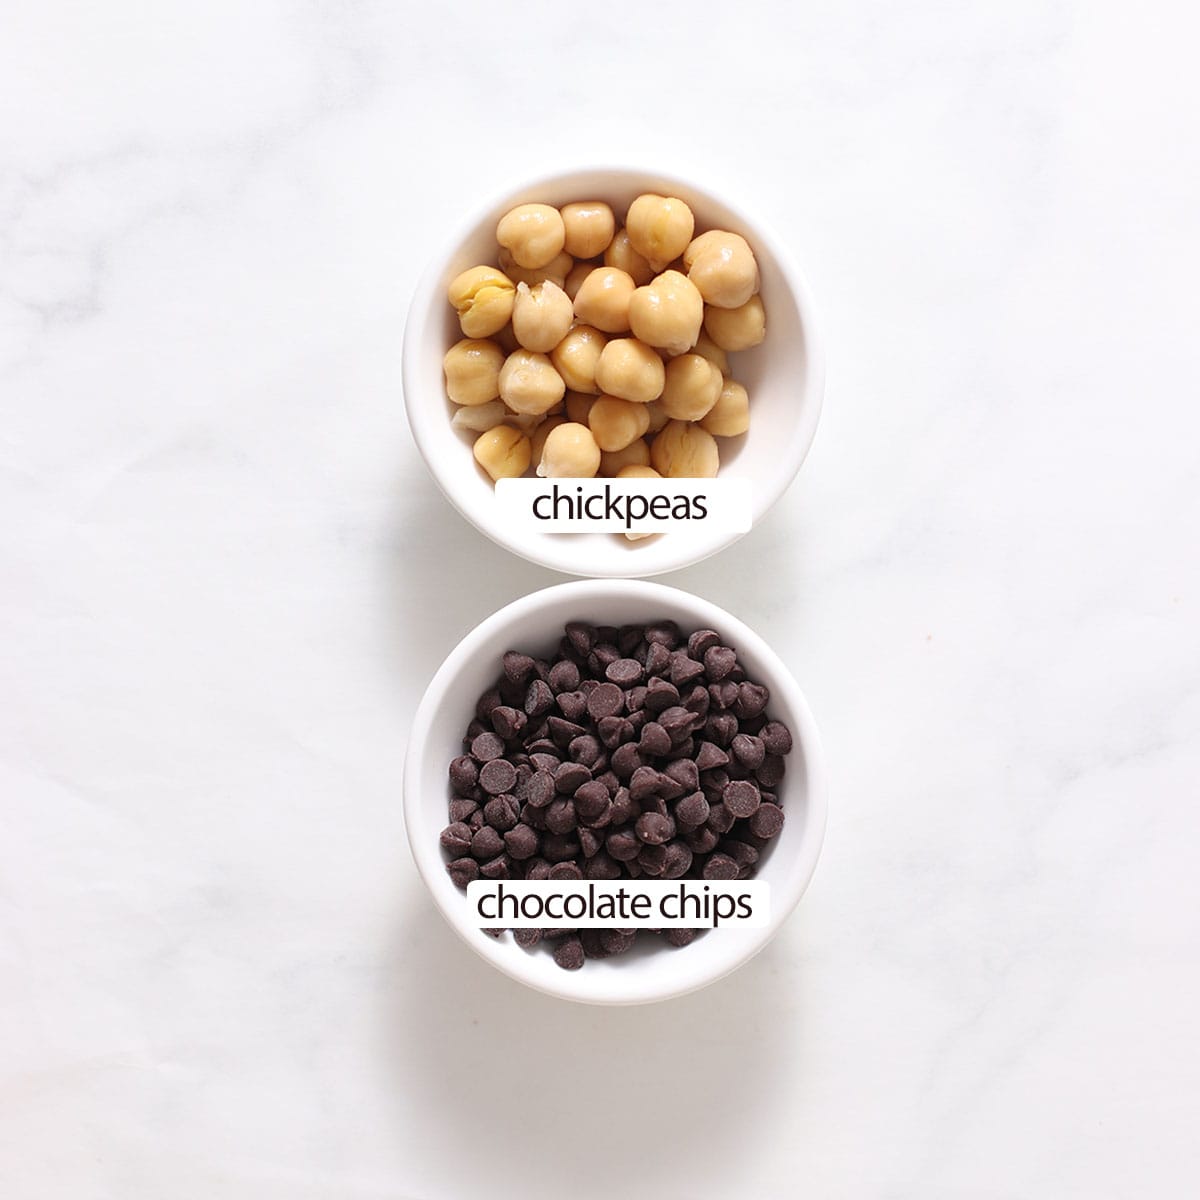 chocolate covered chickpeas ingredients.